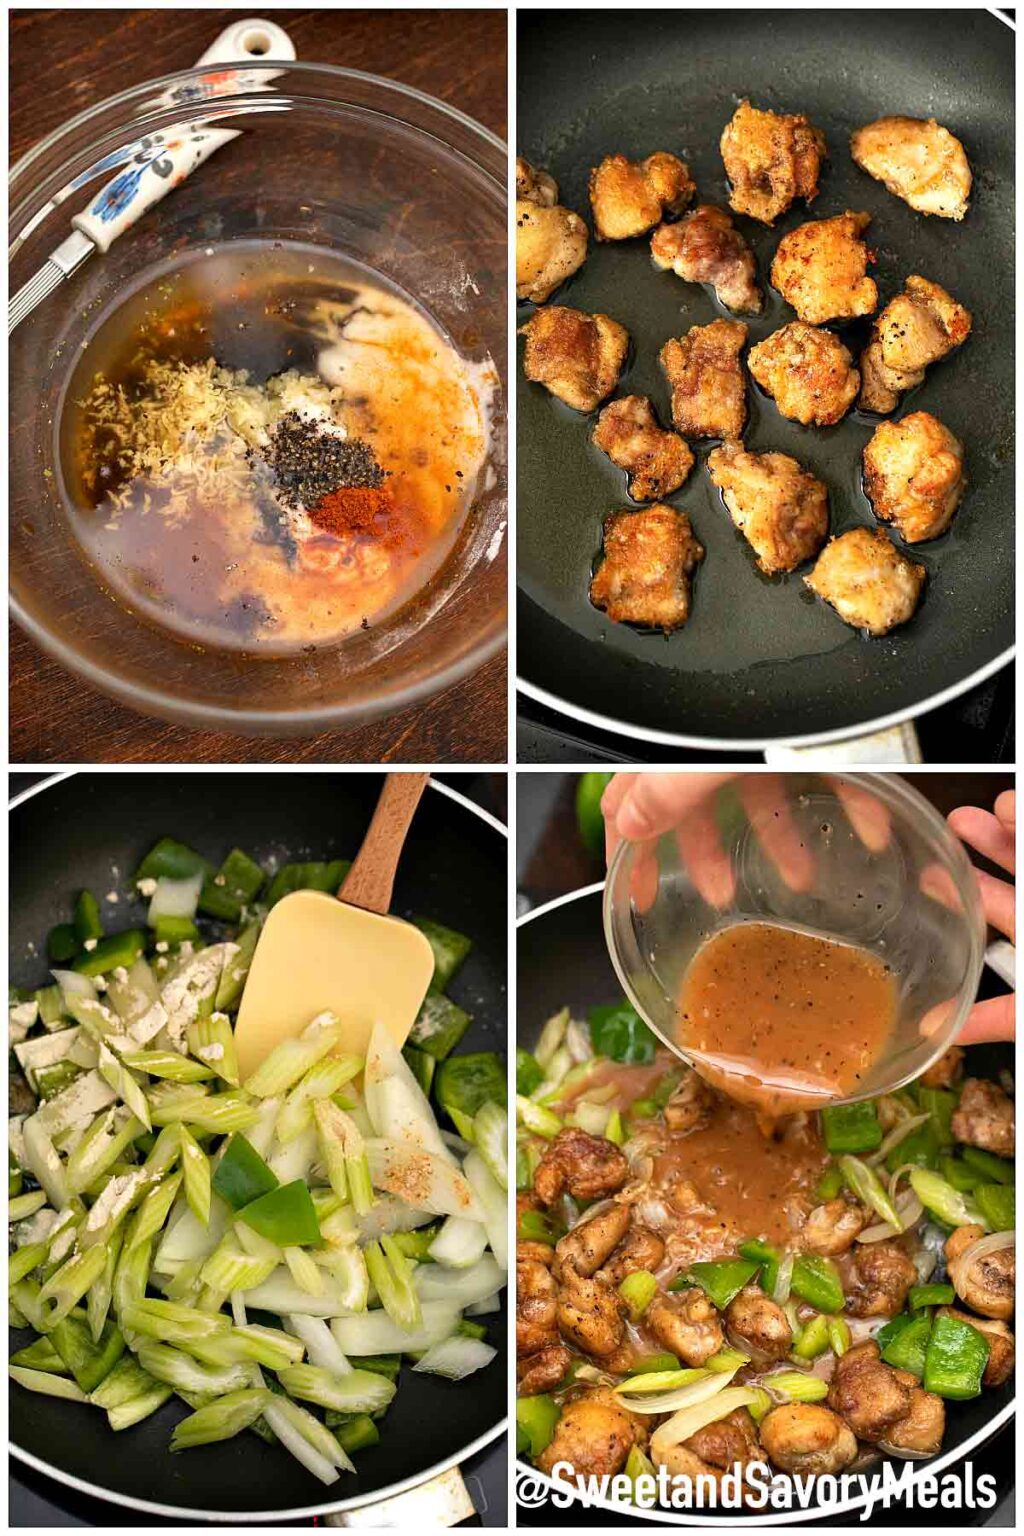 Panda Express Black Pepper Chicken [Video] - Sweet and Savory Meals